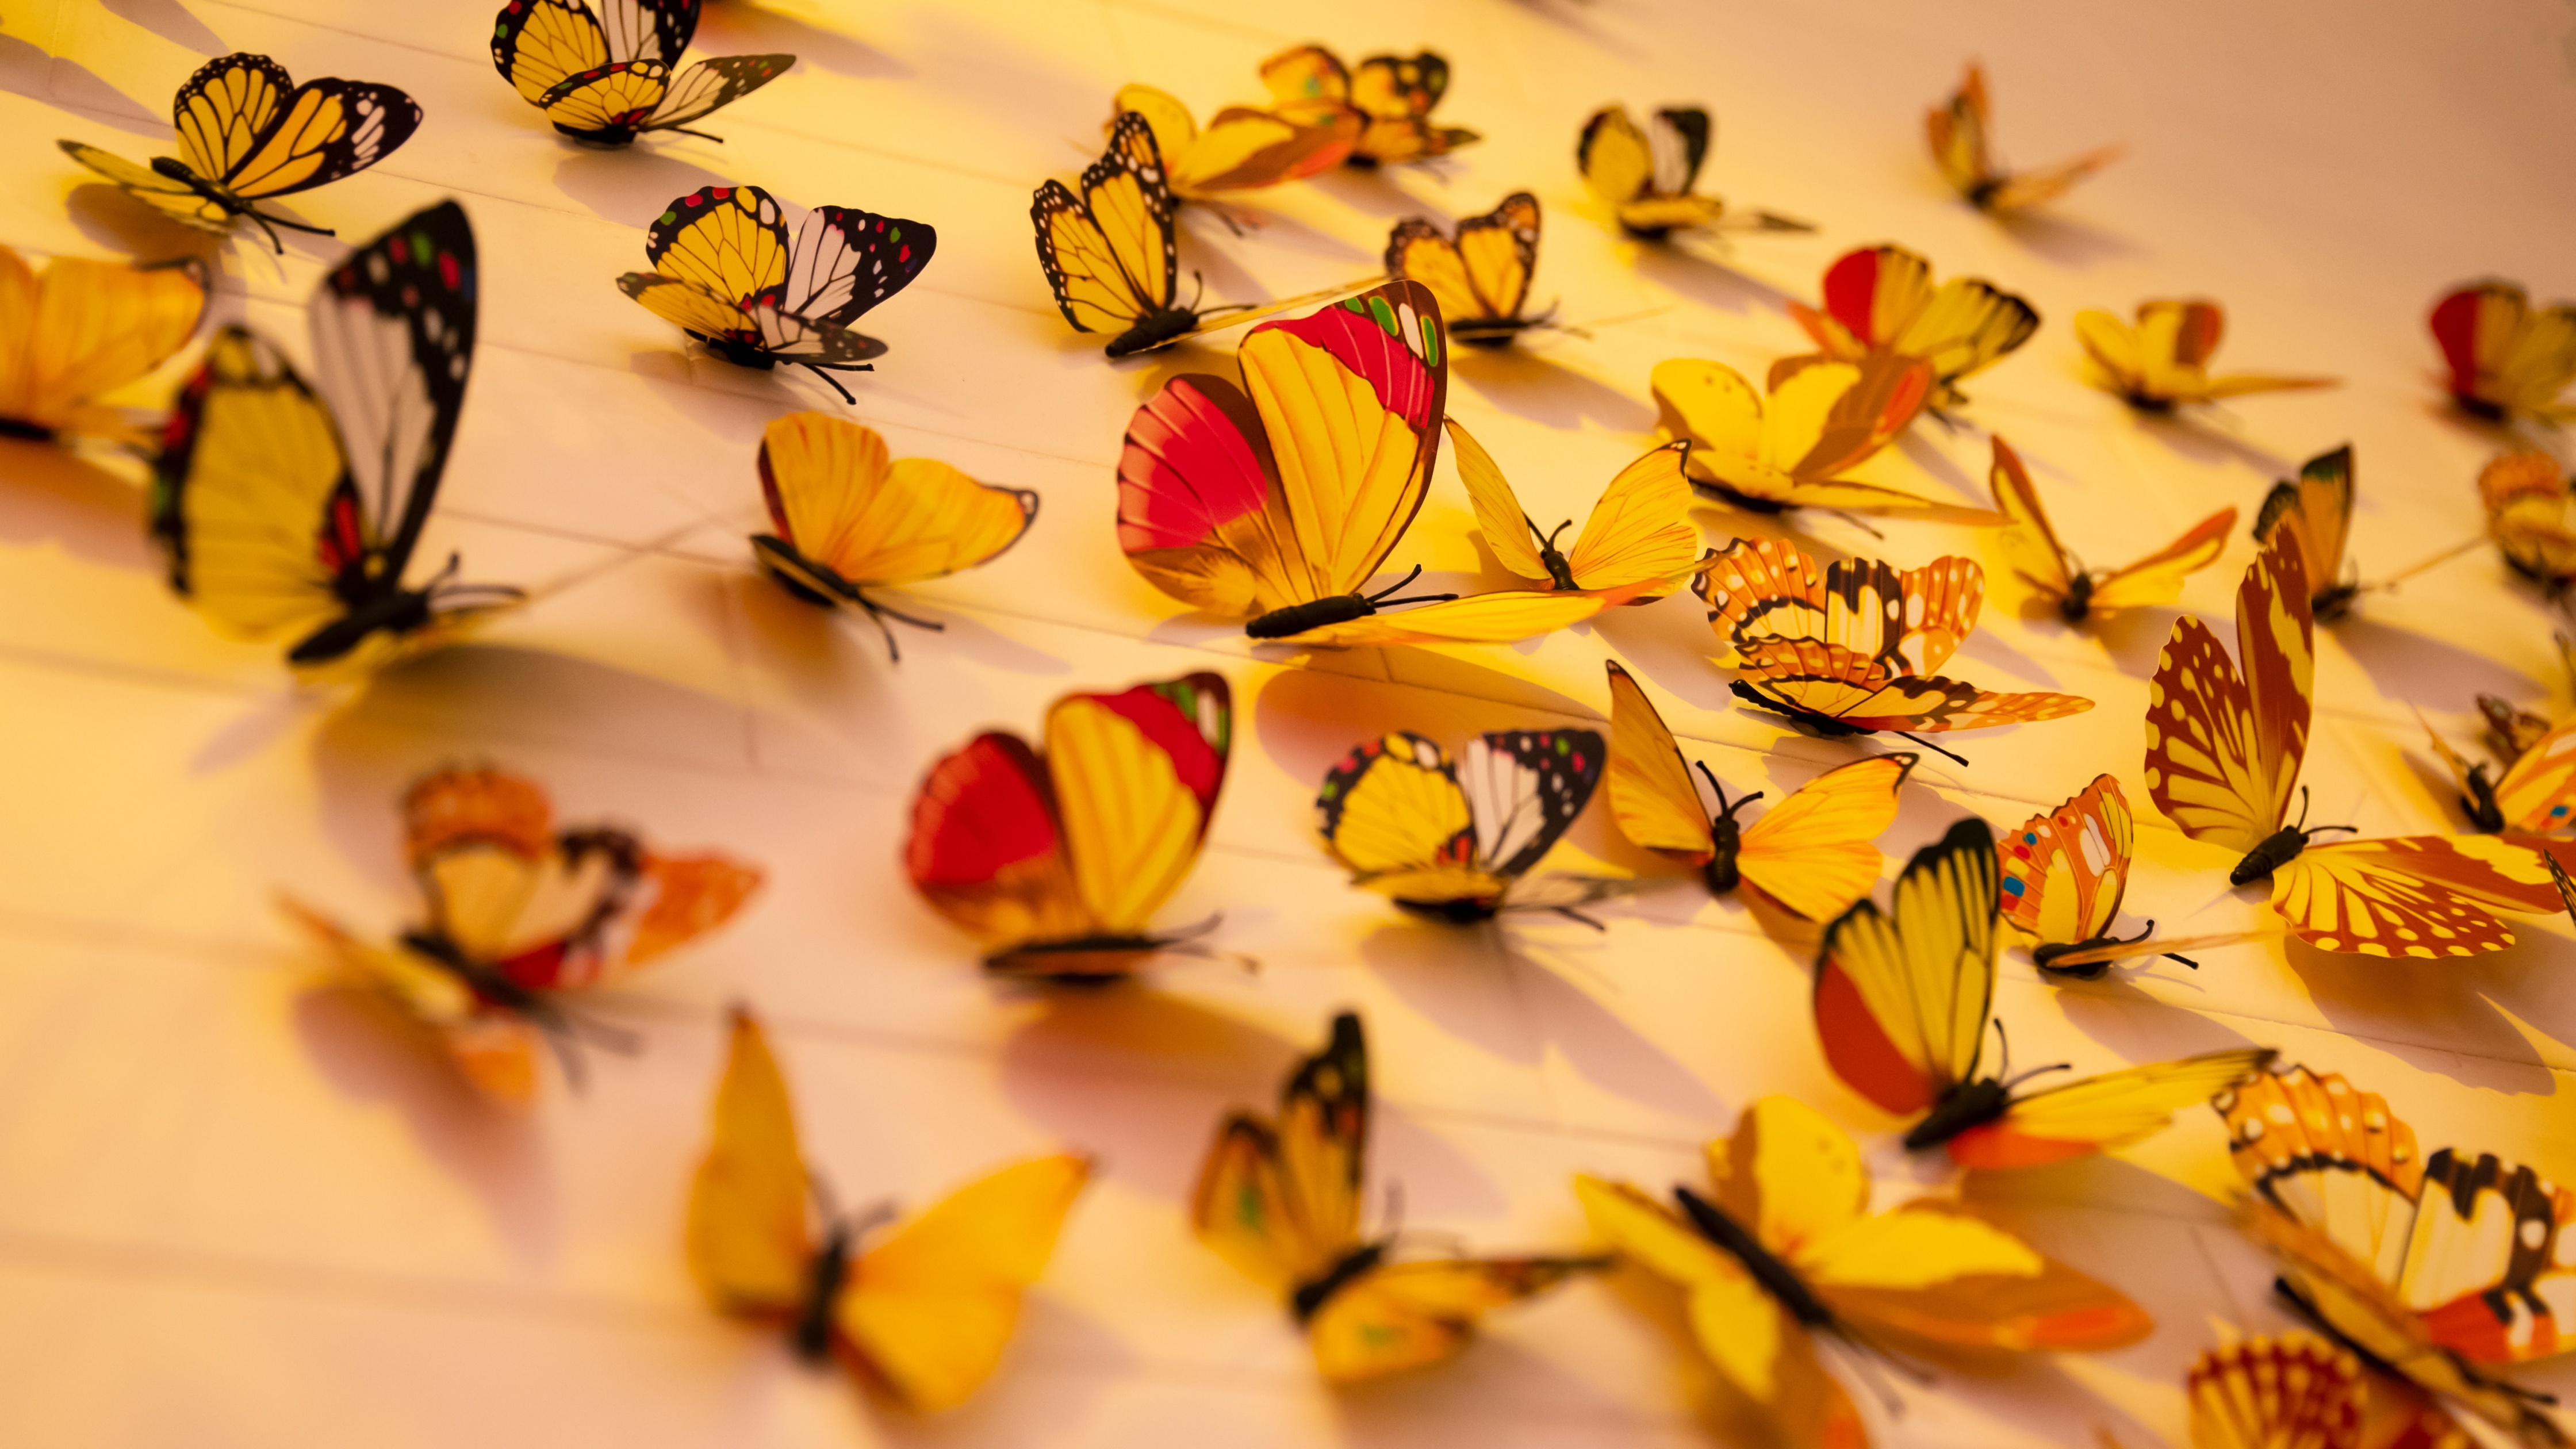 Butterfly Aesthetic Pictures  Download Free Images on Unsplash